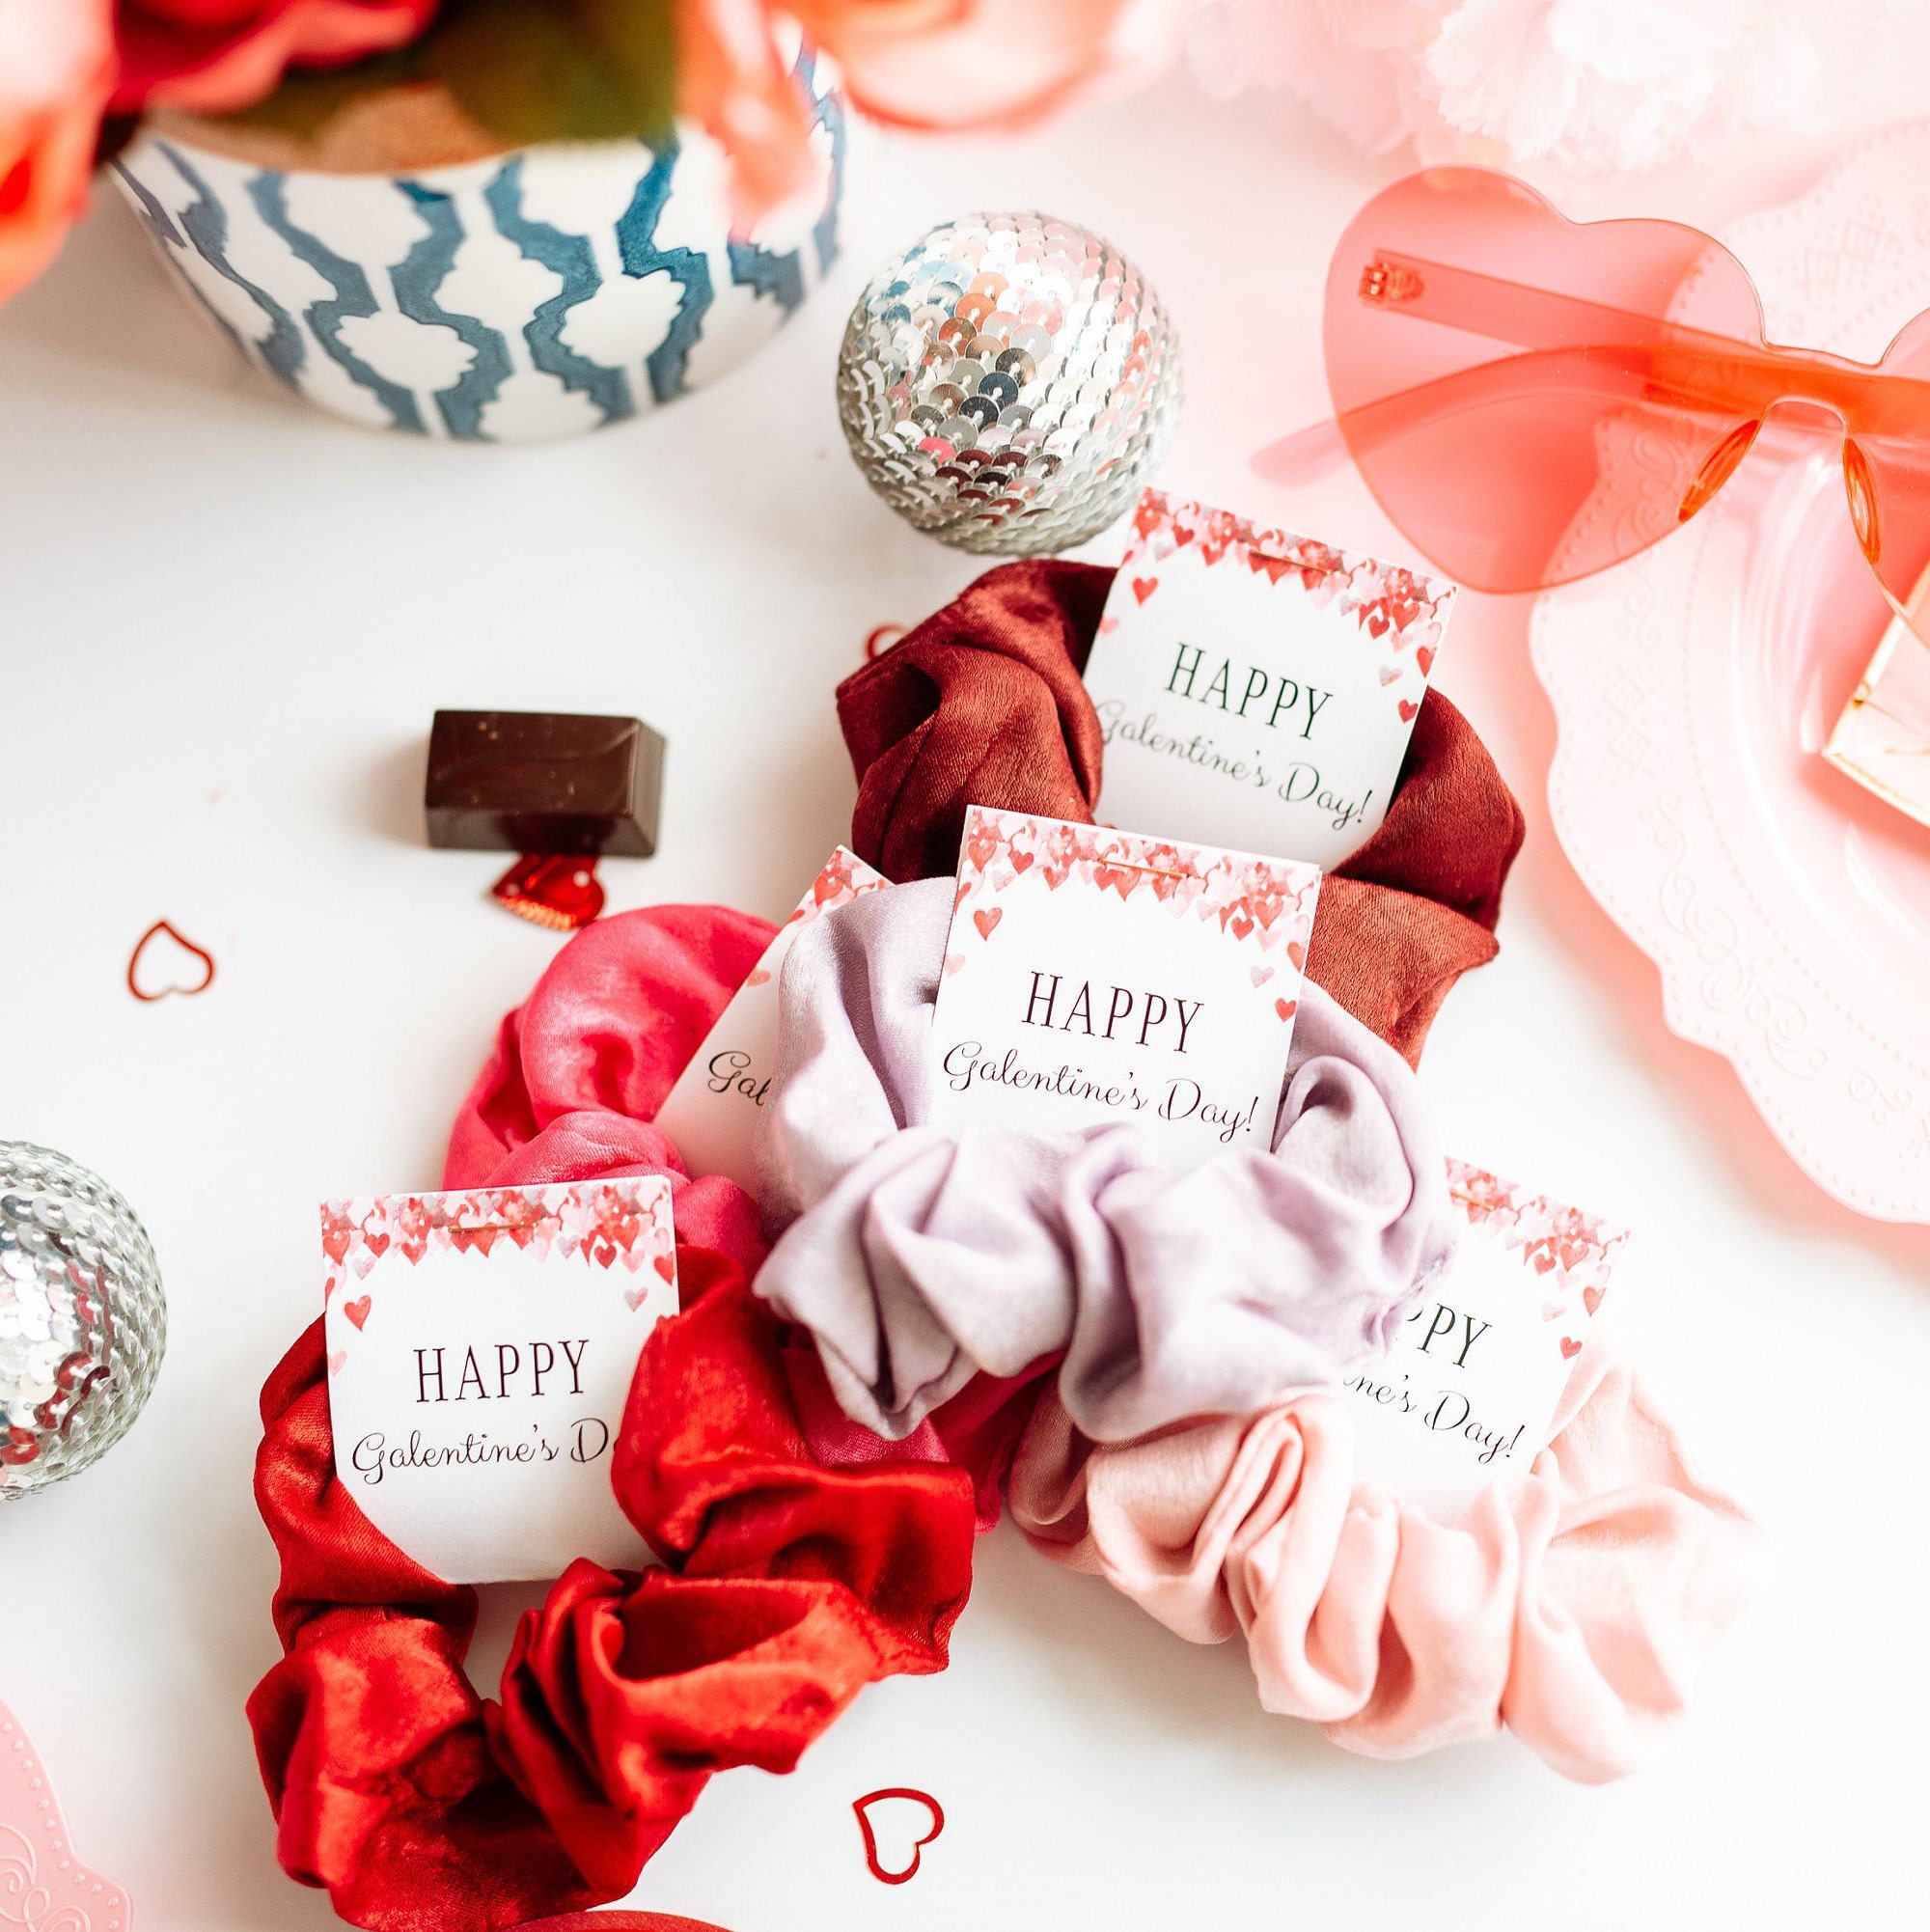 Happy Galentines Day Gift for Friends, Hair Scrunchies - PlumPolkaDot